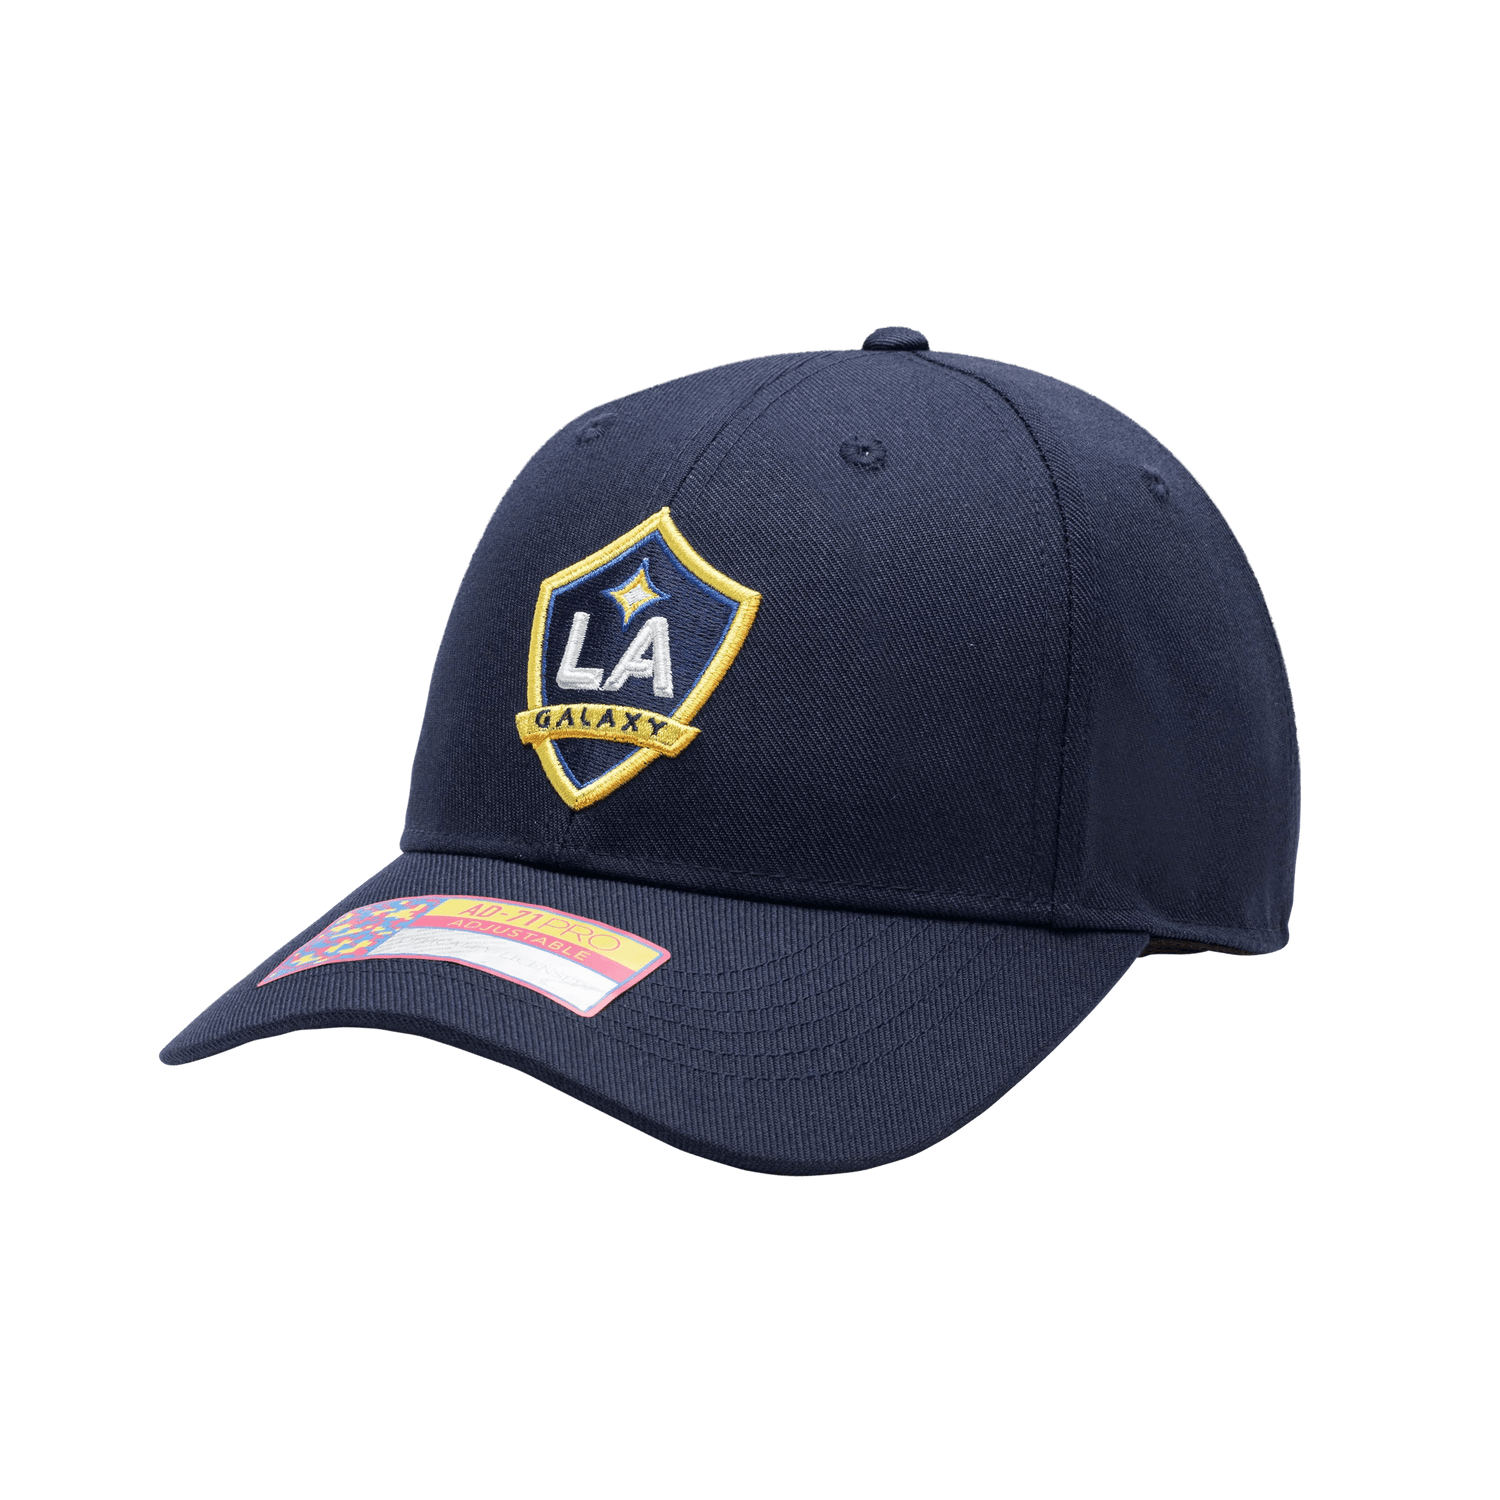 FI Collection LA Galaxy Standard Adjustable Cap (Lateral - Side 1)